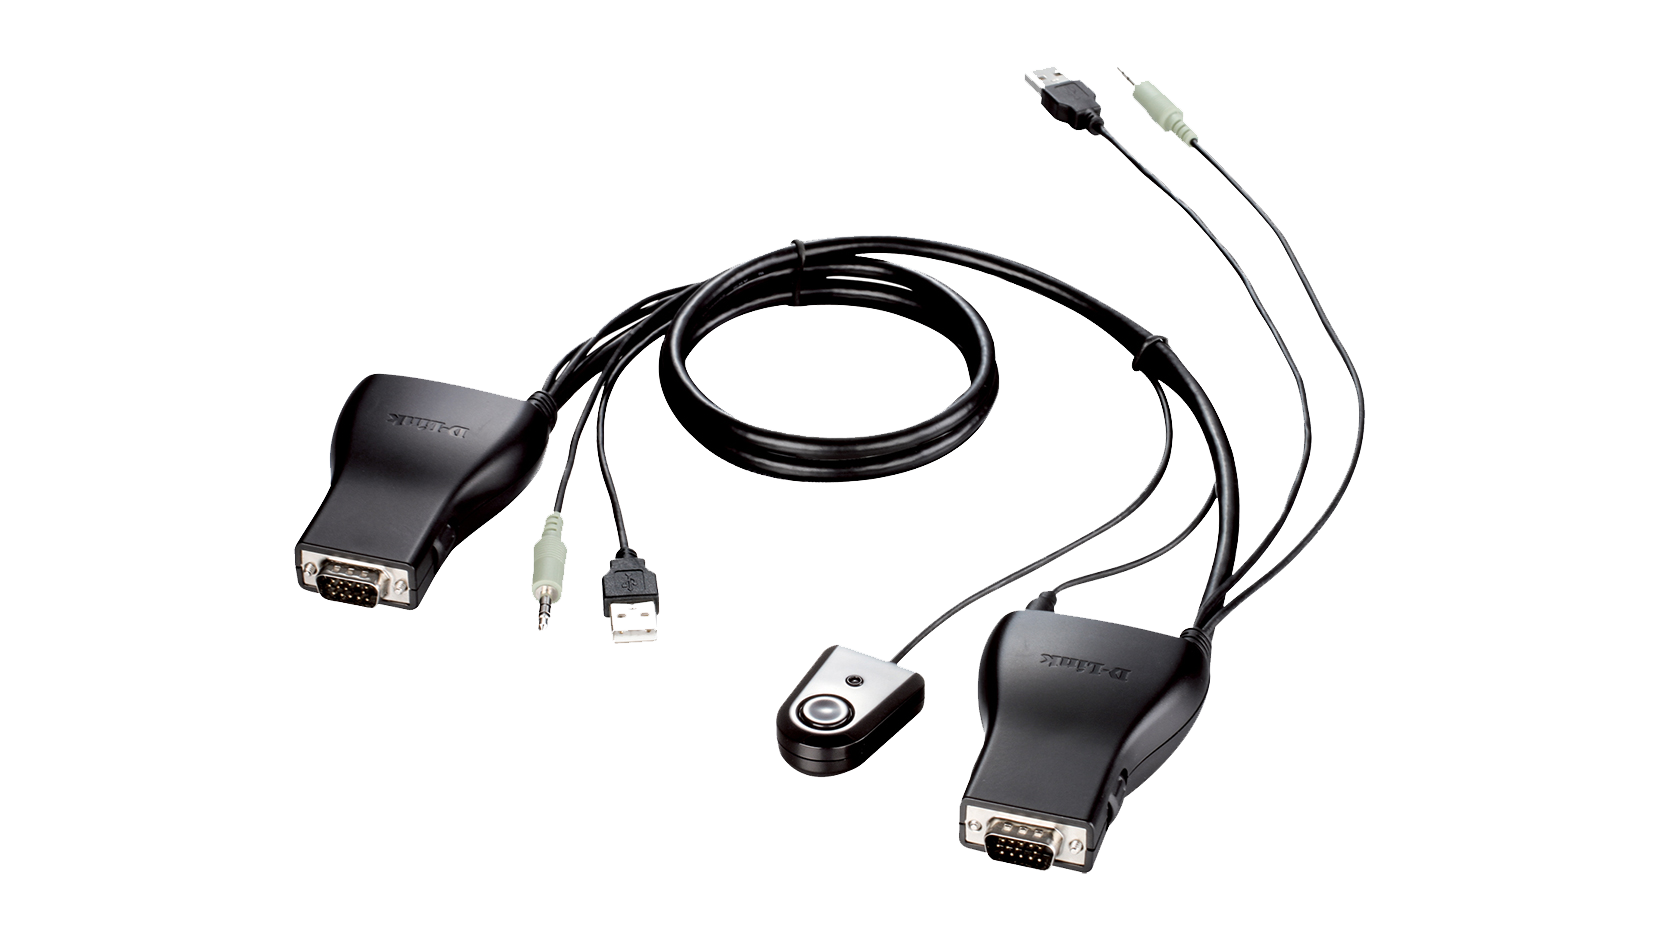 2-port USB-2.0 KVM Switch with Audio Support